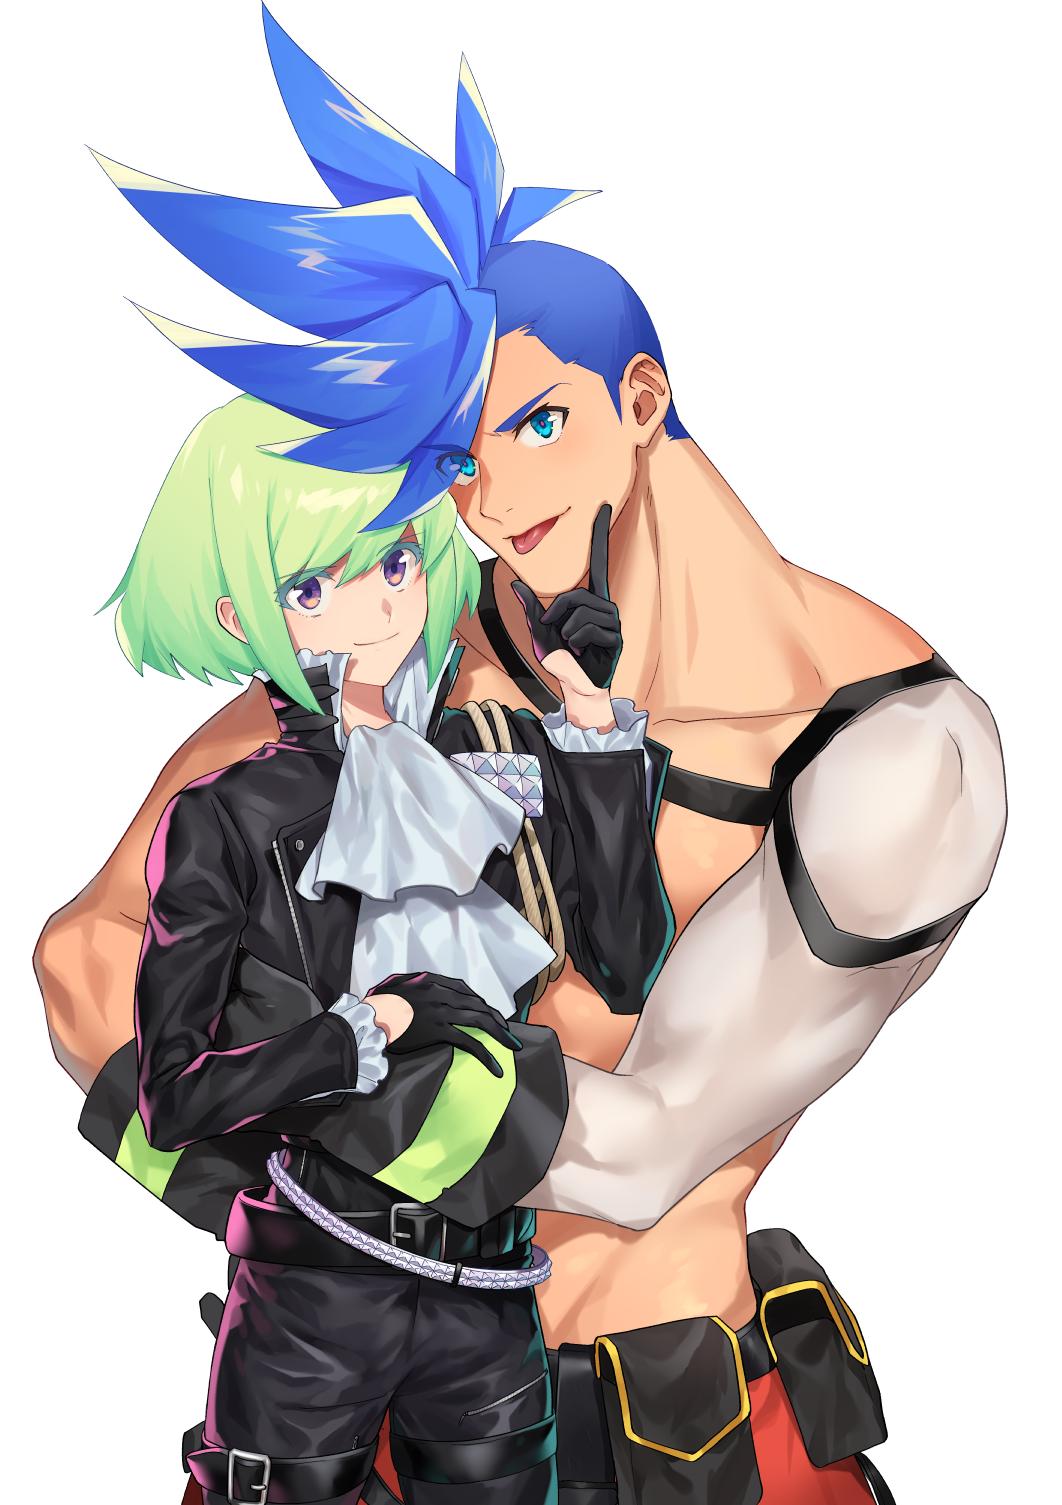 2boys blue_eyes blue_hair chin_grab cravat galo_thymos green_hair highres hug ke889 lio_fotia looking_at_viewer male_focus multiple_boys promare shirtless size_difference spiky_hair tongue tongue_out violet_eyes